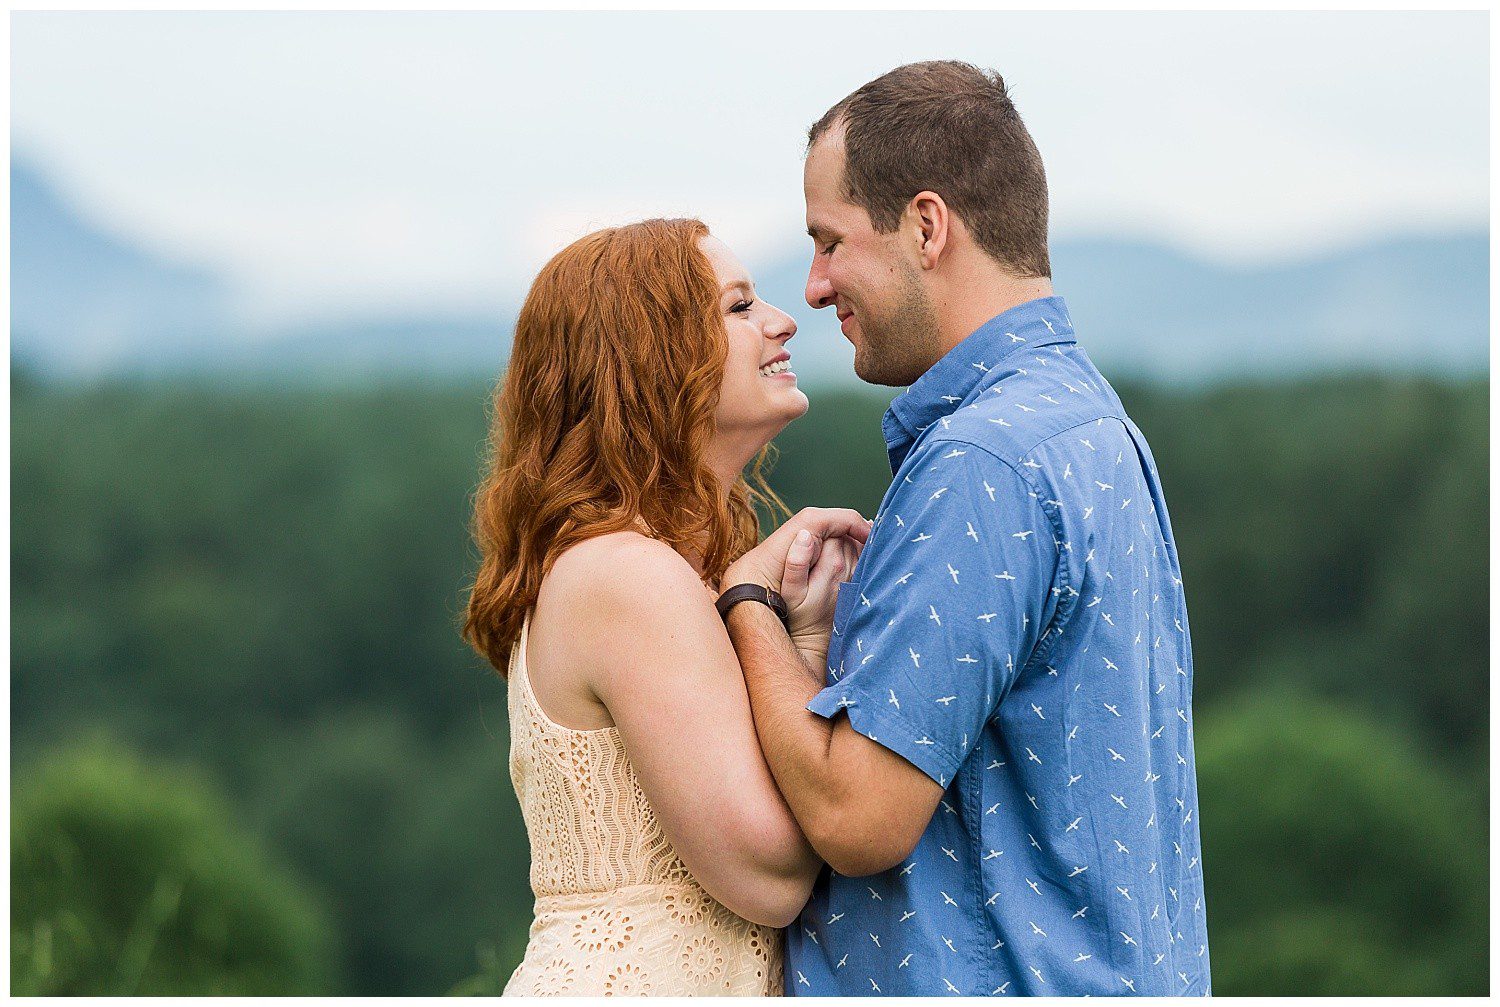 Asheville Outdoor Engagement Session